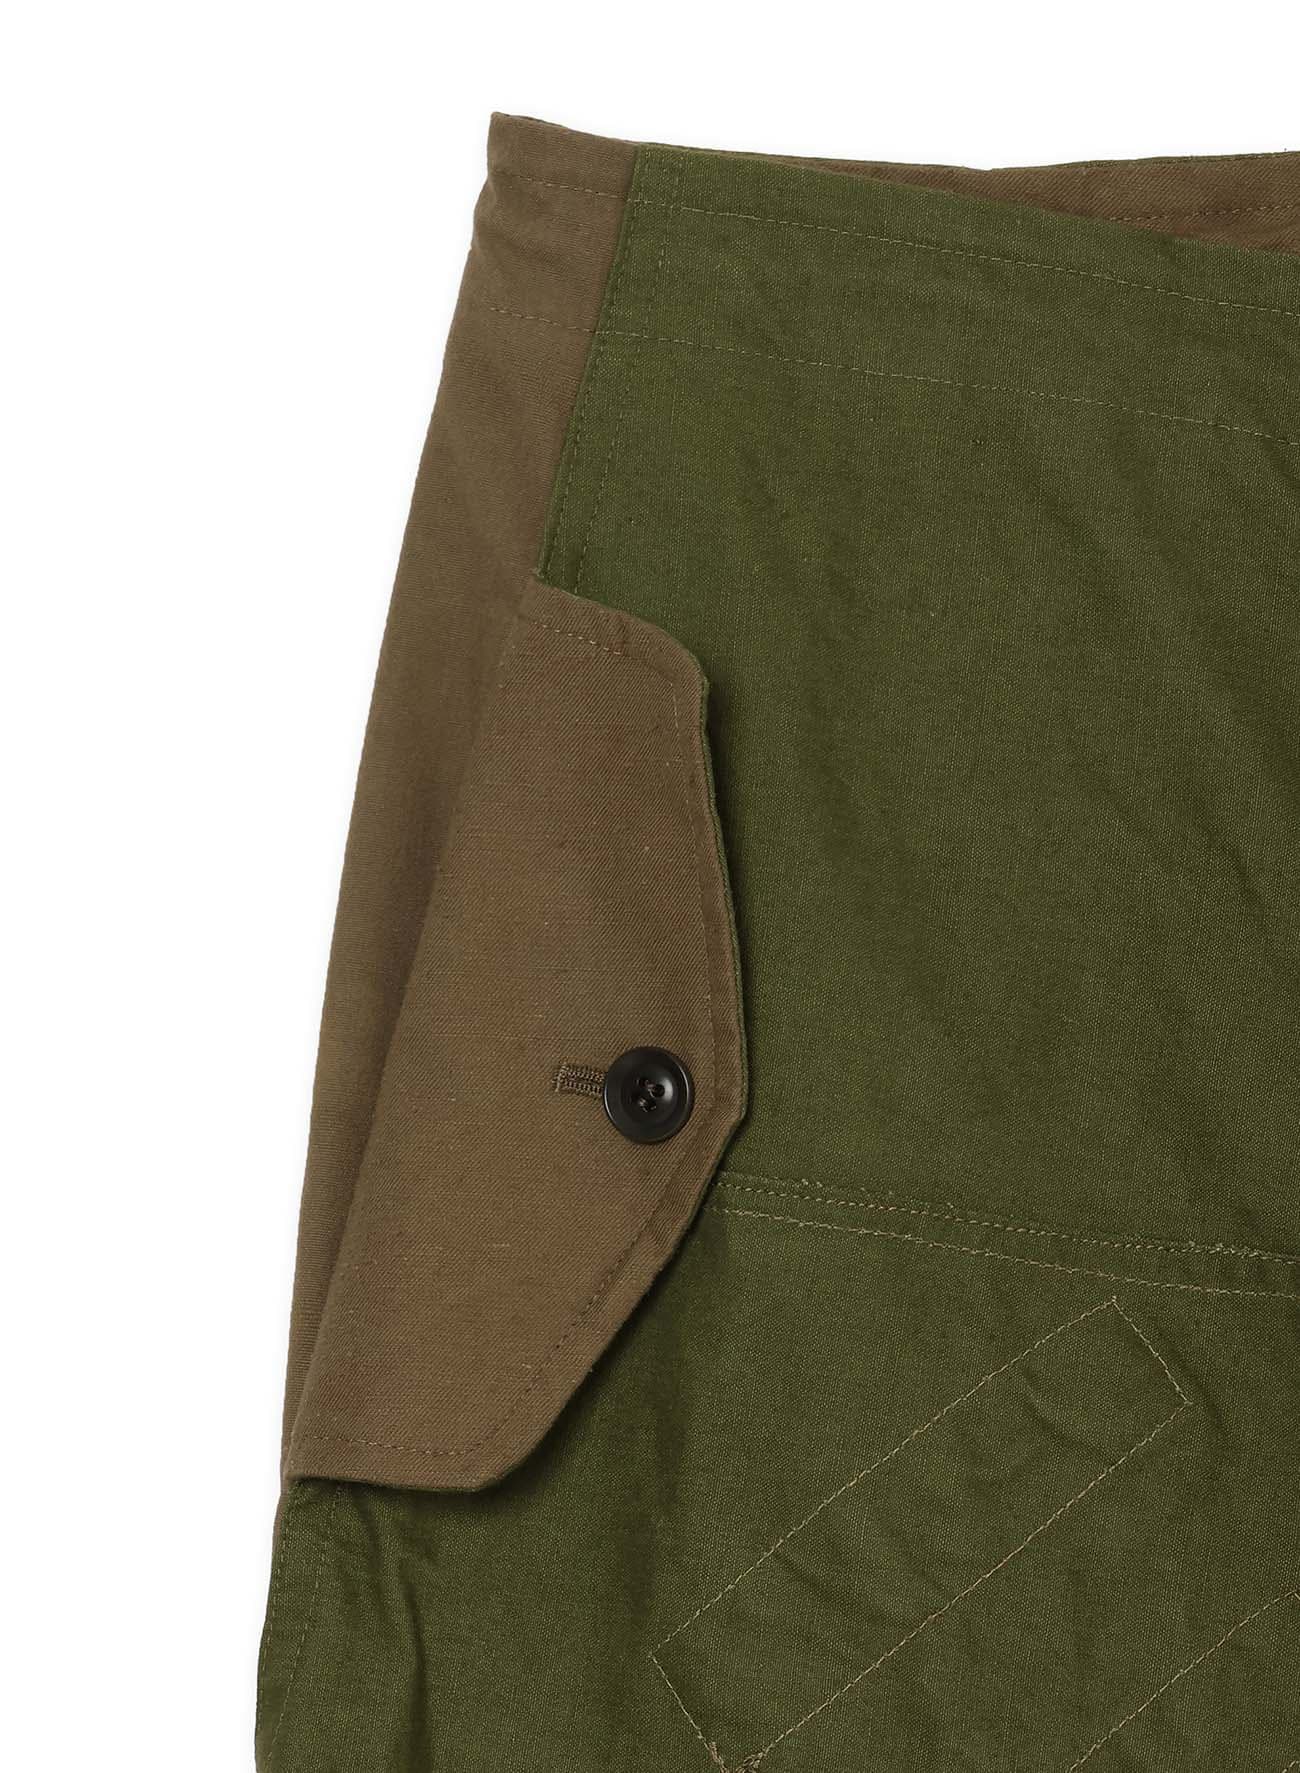 MILITARY TENT CLOTH FOUR POCKETS PANTS